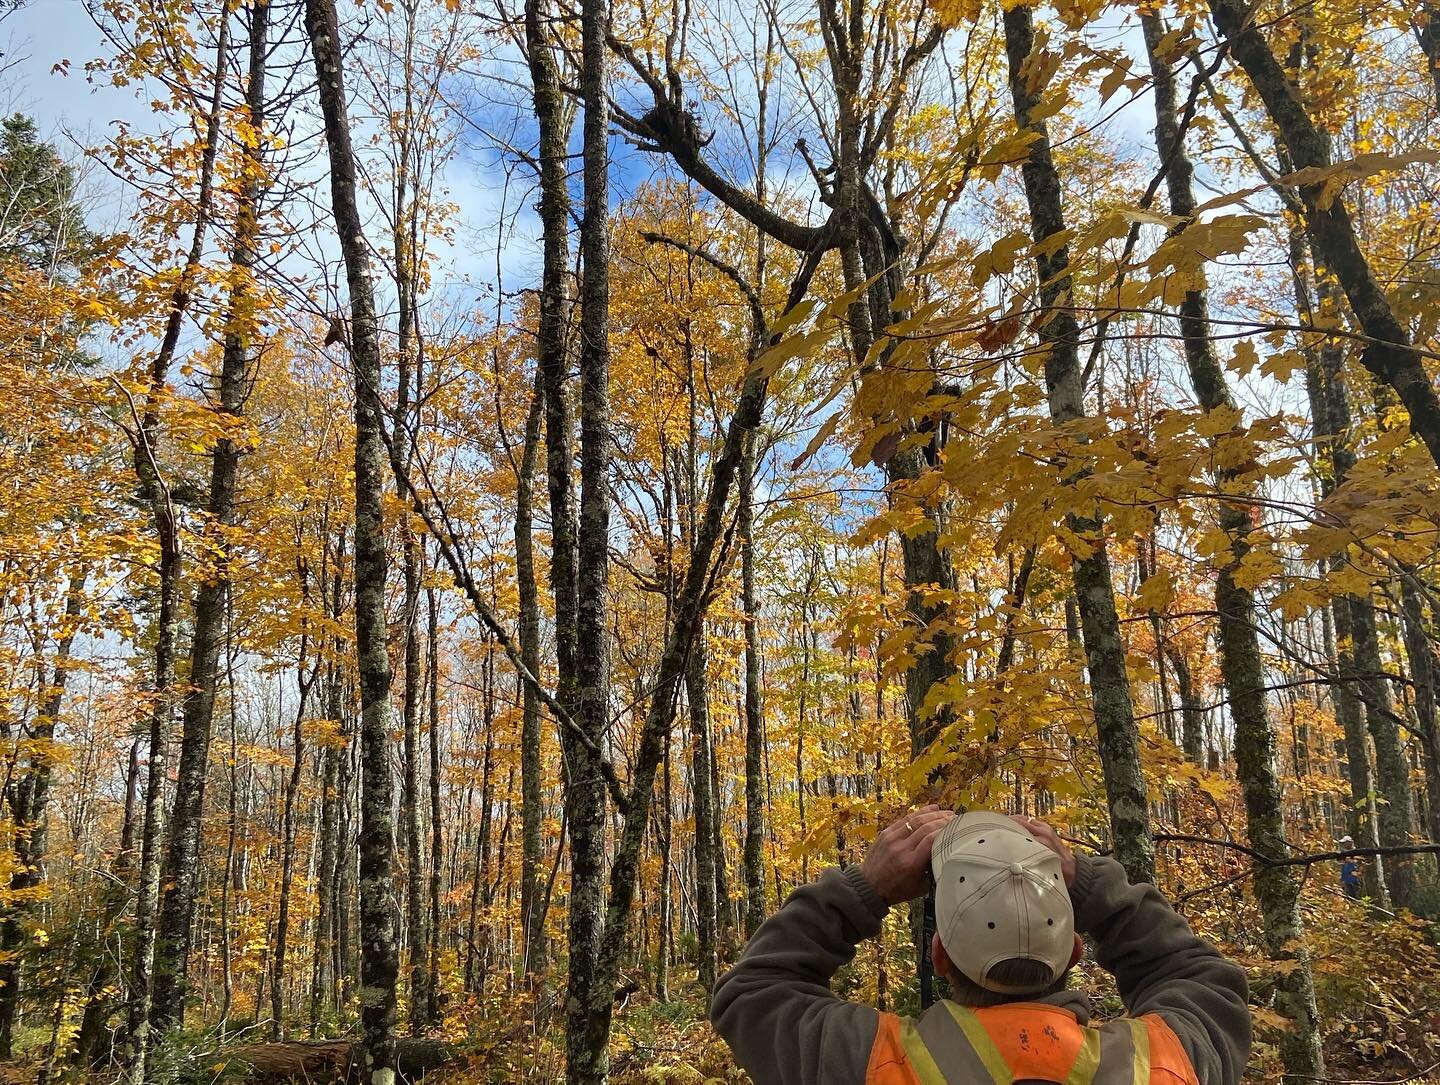 The team at the MCFC has grown this fall, and we haven&rsquo;t wasted any time taking in the scenery! 🍂 

🌳In October, we welcomed ON @cif_ifc staff to tour the license area and pick hardwood sites for an upcoming tree marking course with @nsccfore